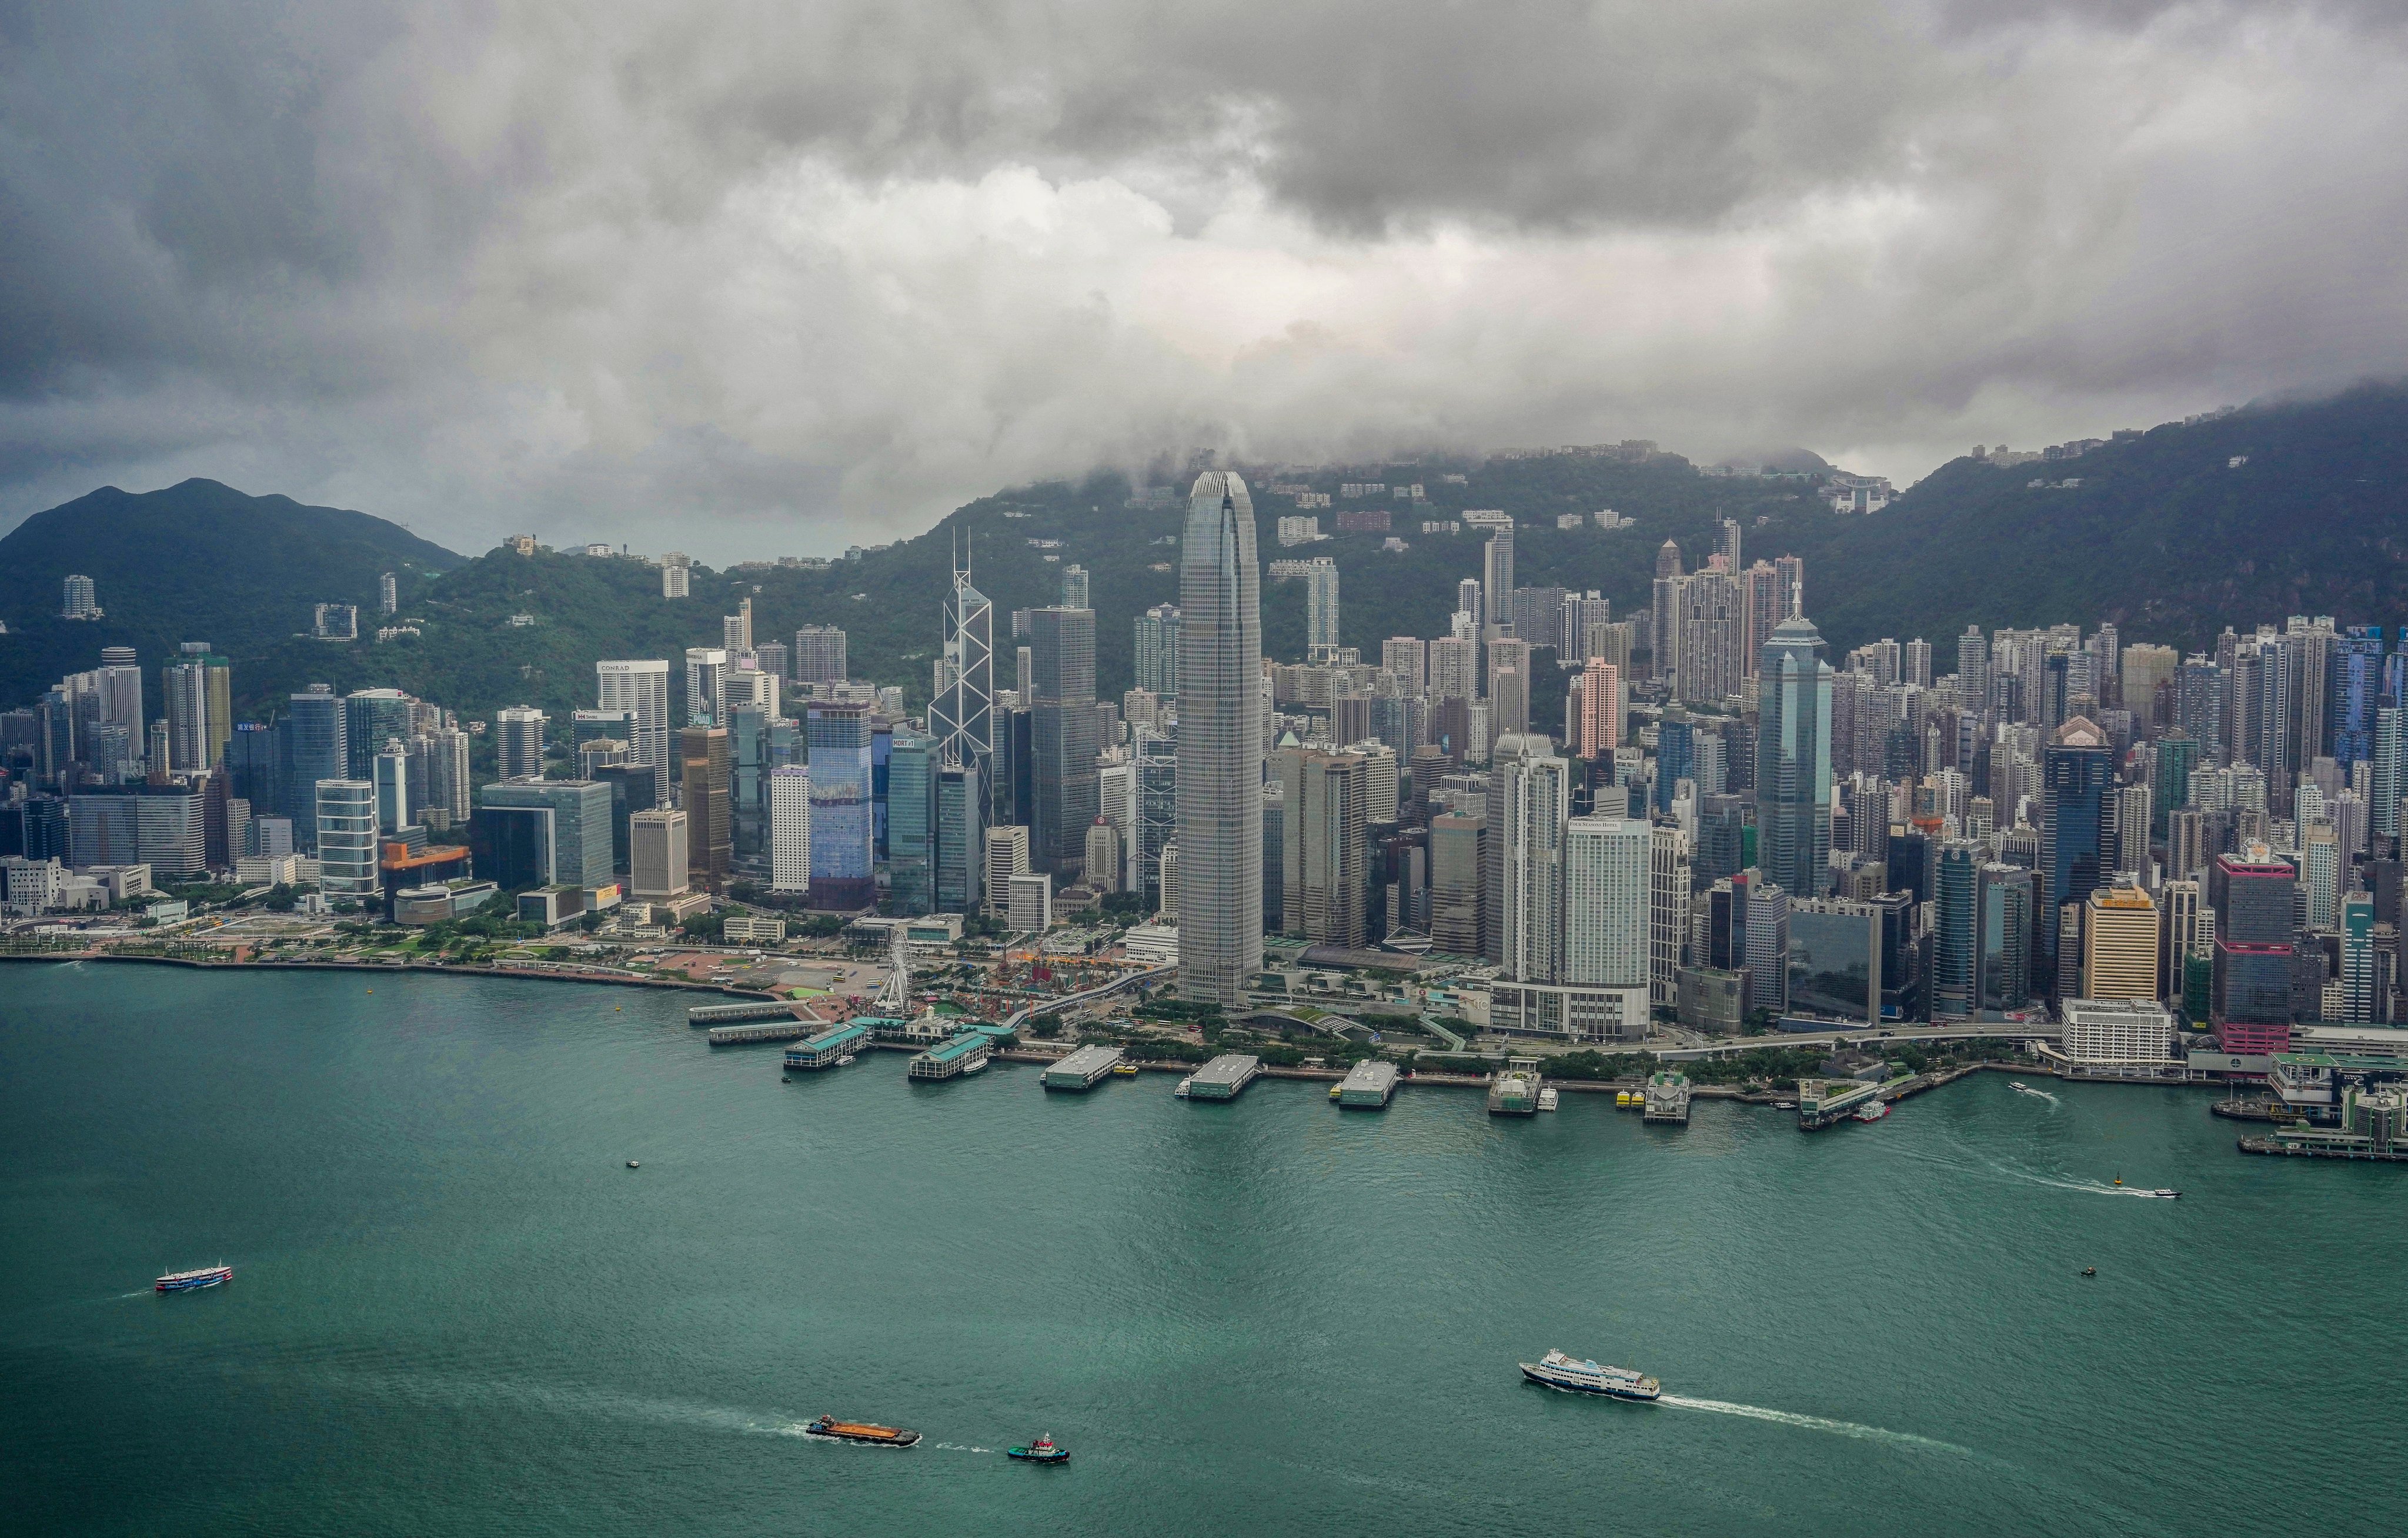 Hong Kong should ask what it can bring to the table if it pursues more trade with Asean countries, global business leaders have said. Photo: Elson Li